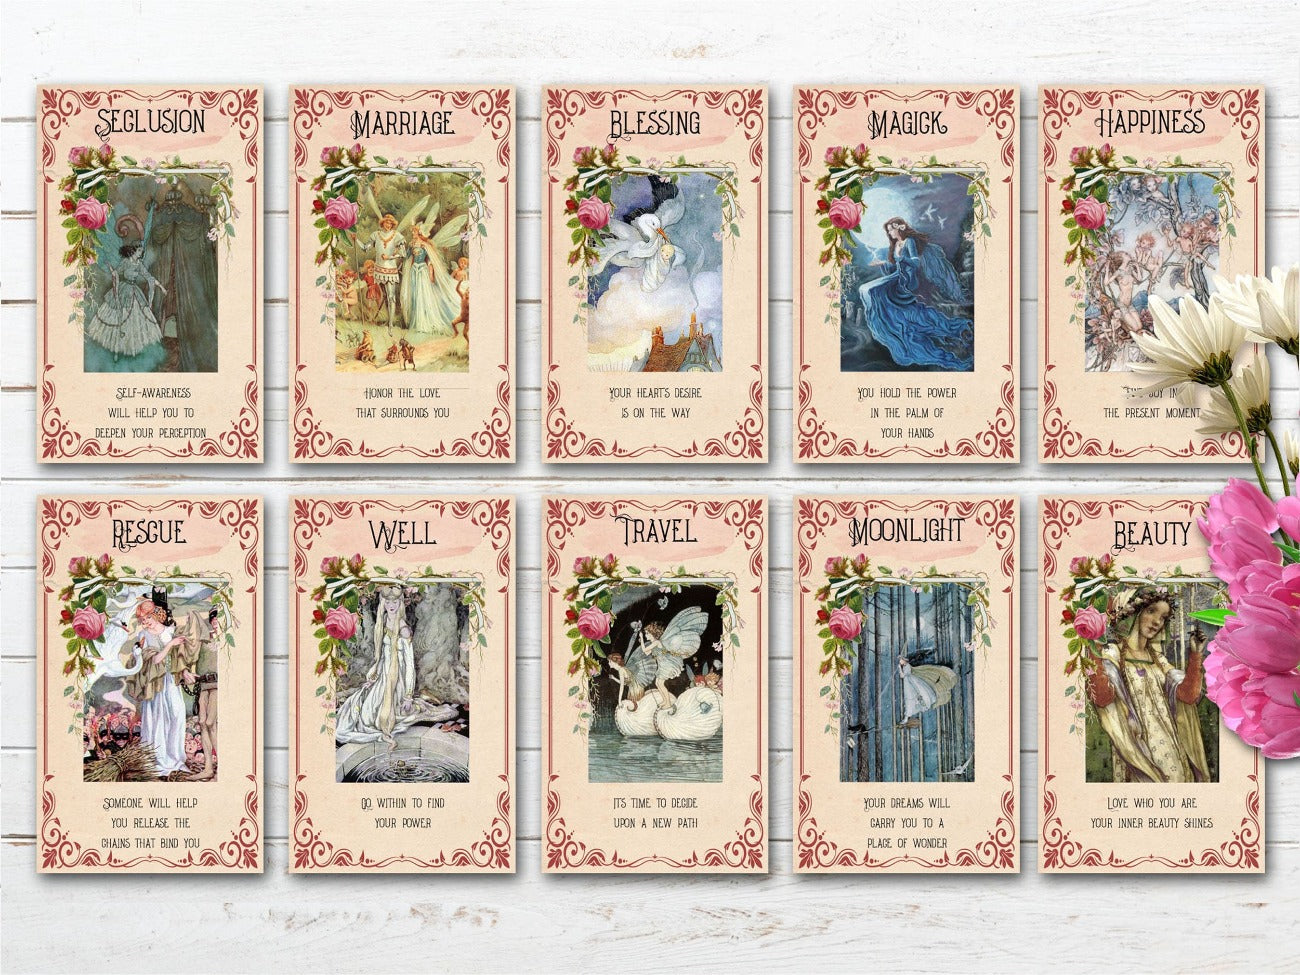 10 Beltane Faery Oracle Cards with rose banners, assorted vintage fairy pictures and ornate borders - Morgana Magick Spell